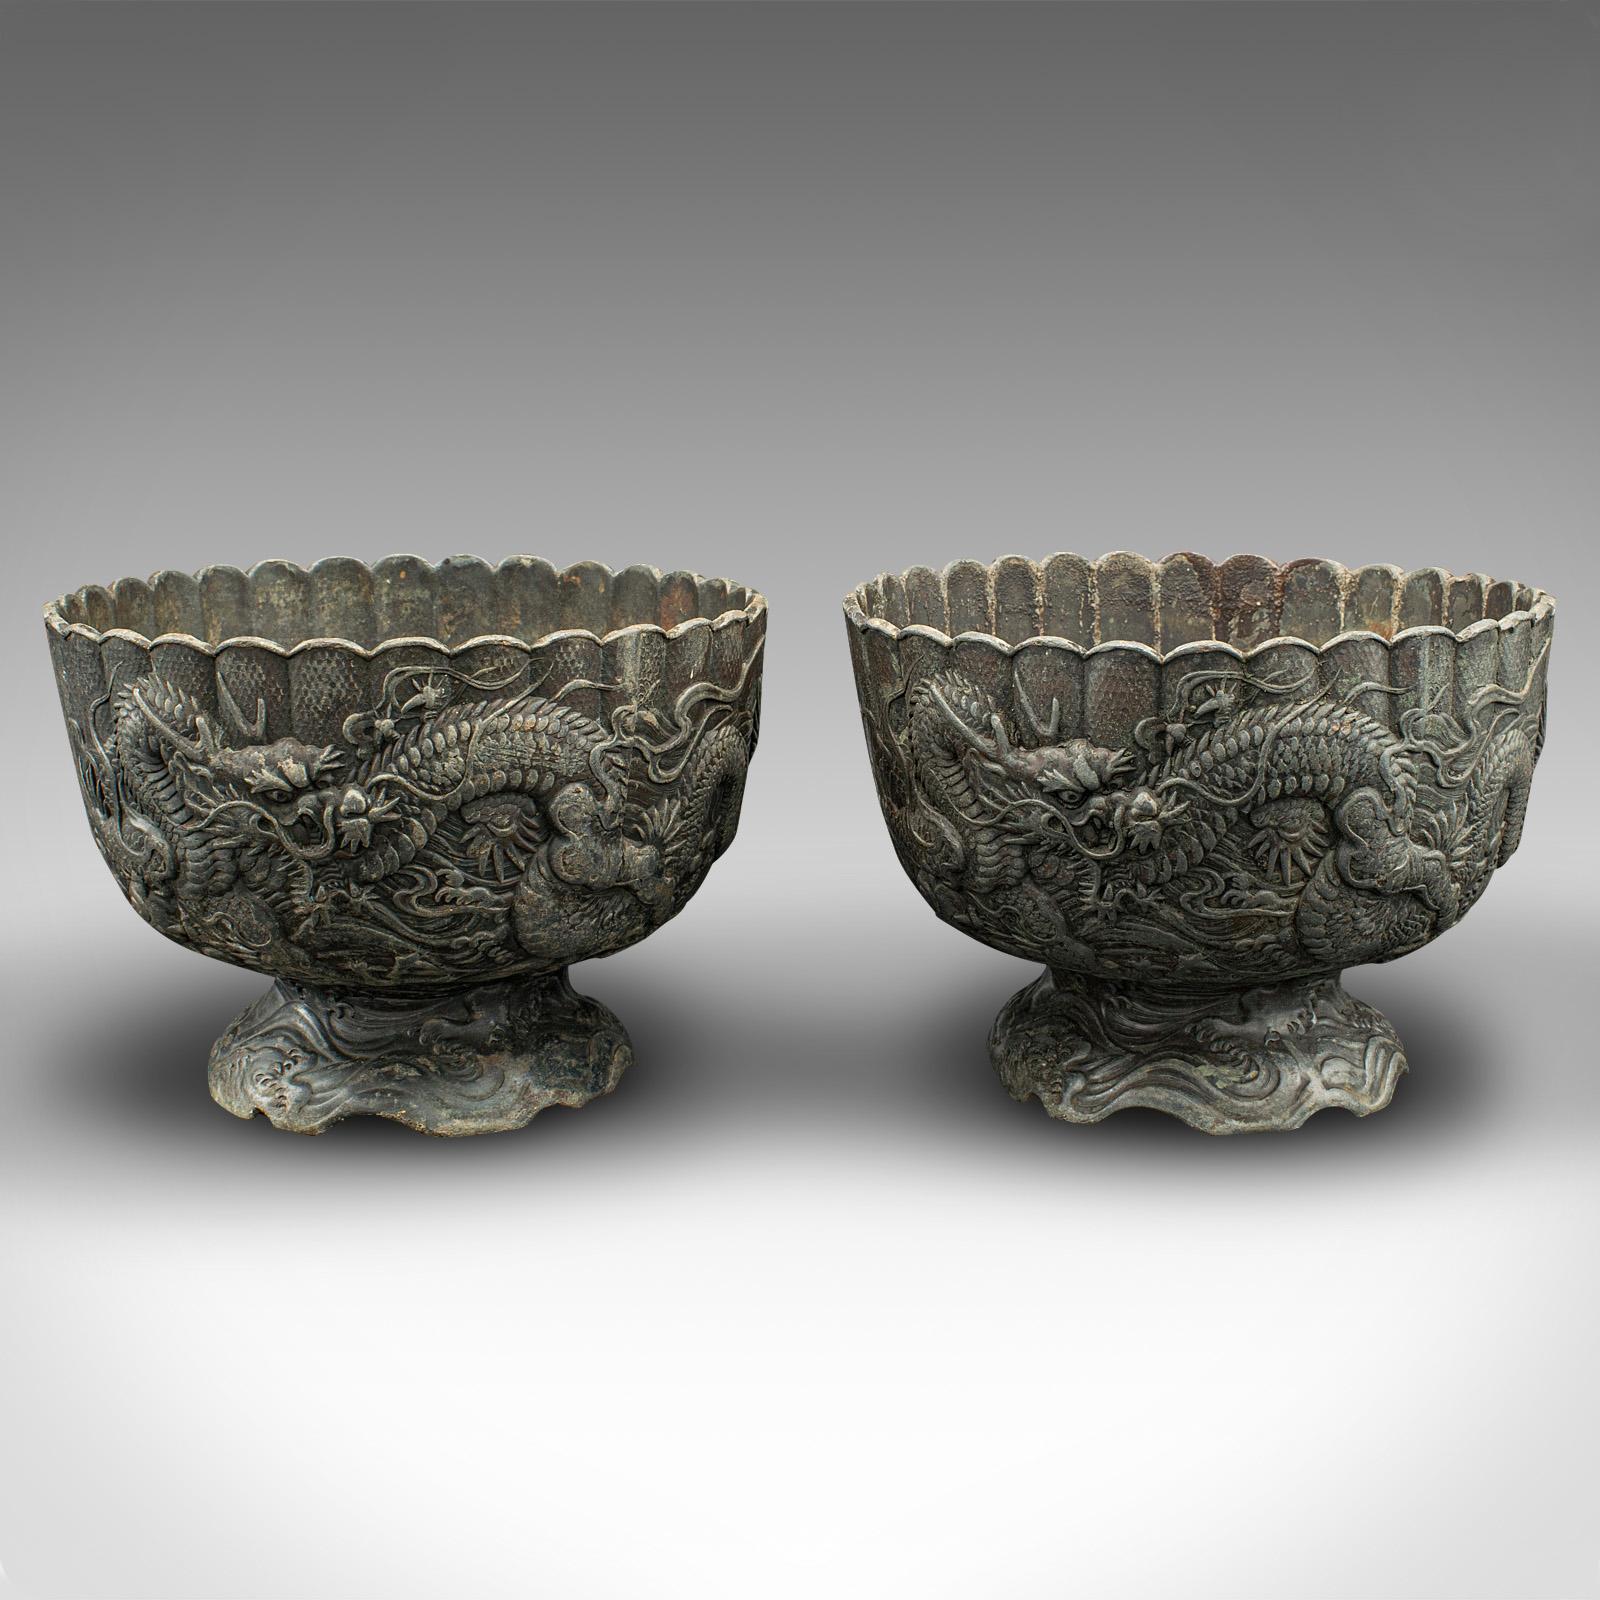 This is a pair of antique decorative planters. A Chinese, cast lead jardiniere pot, dating to the Victorian period, circa 1880.

Strikingly presented relief decor accentuates these appealing planter
Displaying a desirable aged patina and in good